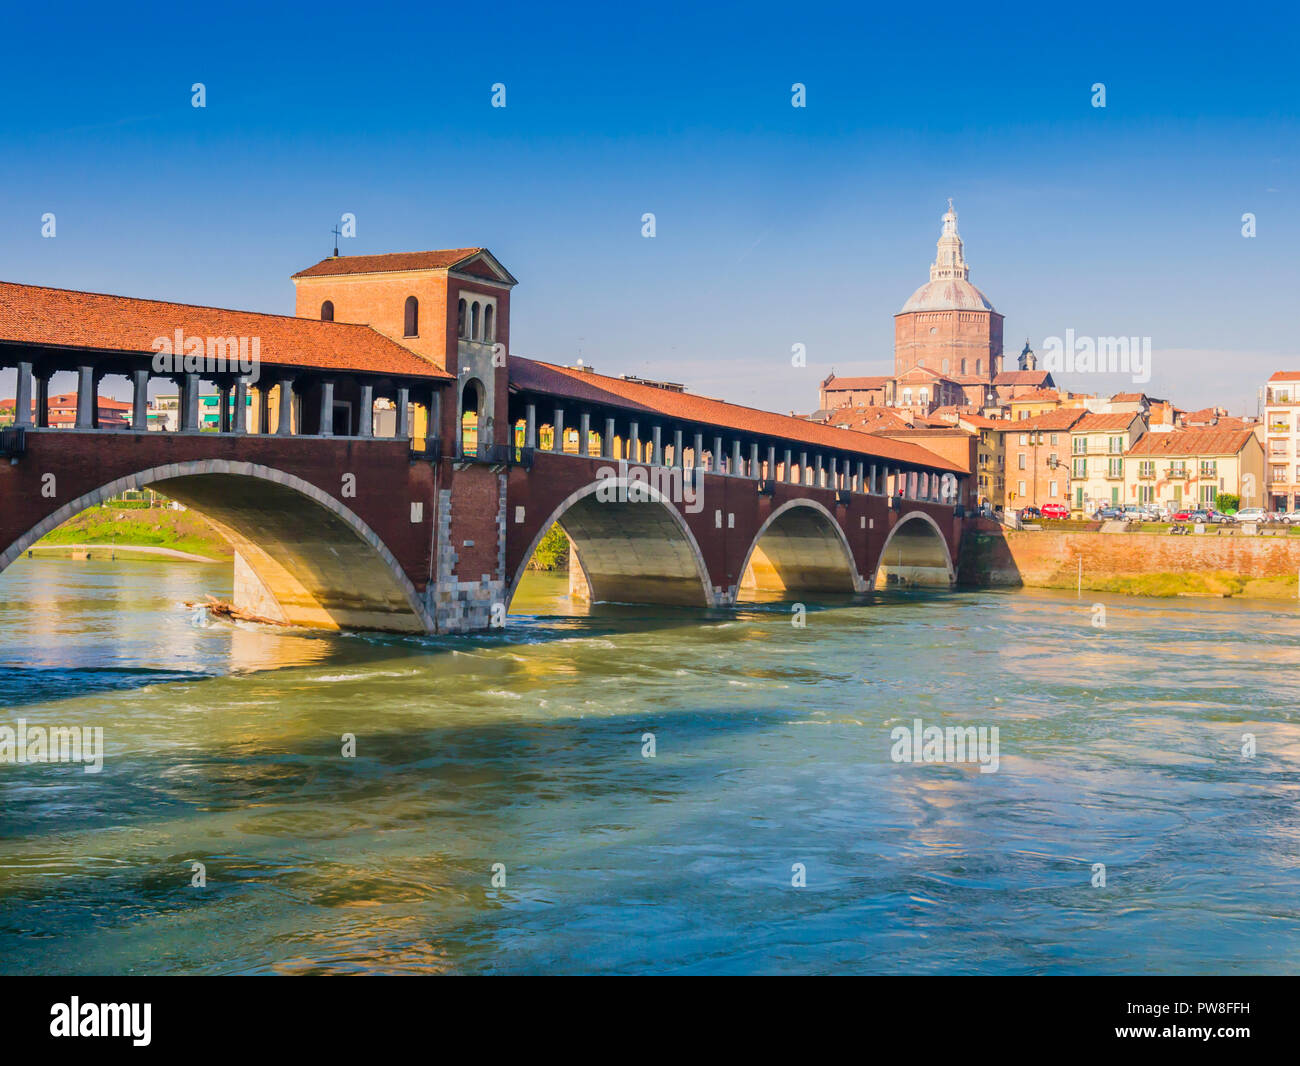 Stunning view of Covered Bridge over river Ticino, Pavia, Italy Stock Photo